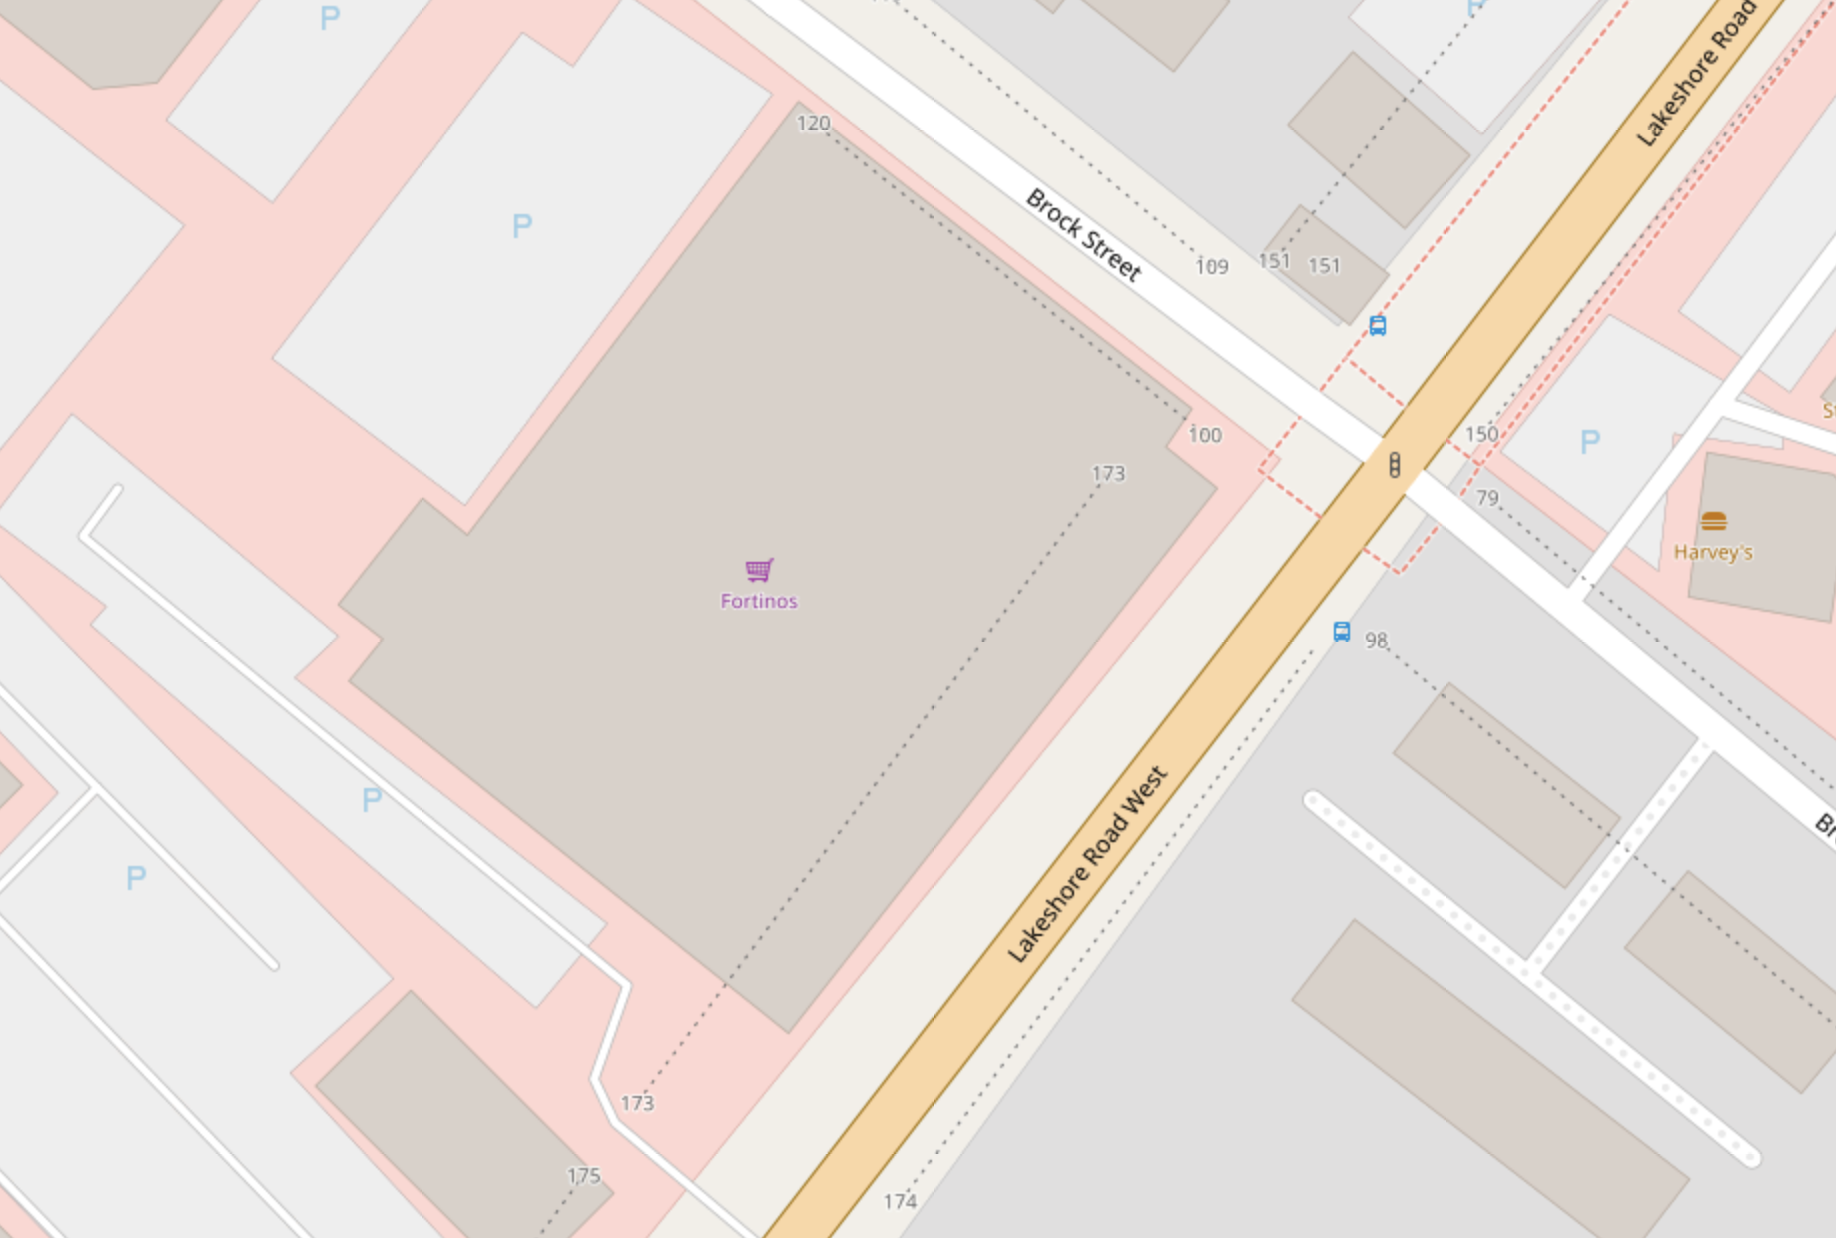 Fortinos on Lakeshore Rd W | Openstreetmap